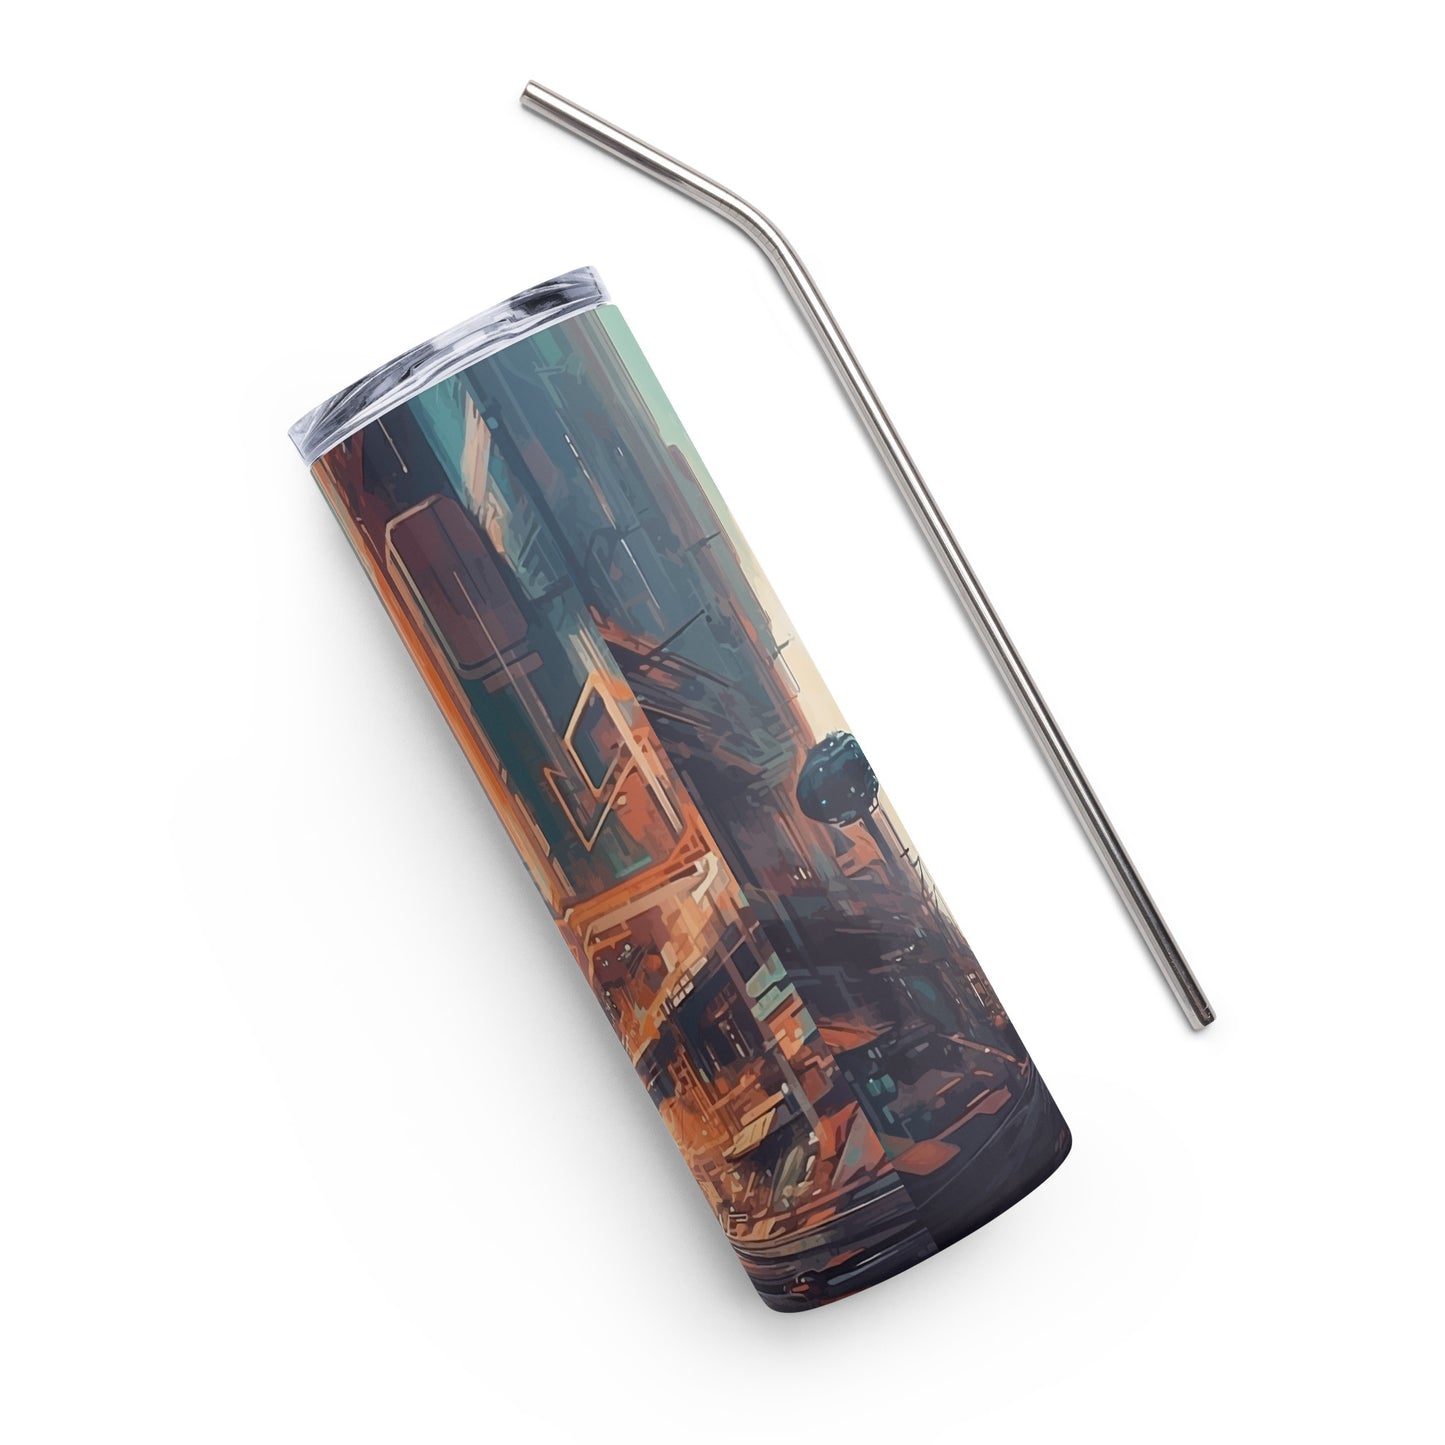 Landscape futuristic painting, Future city illustration, Skyscrapers of the future, Fantasy town, Fantasy high-tech city - Stainless steel tumbler